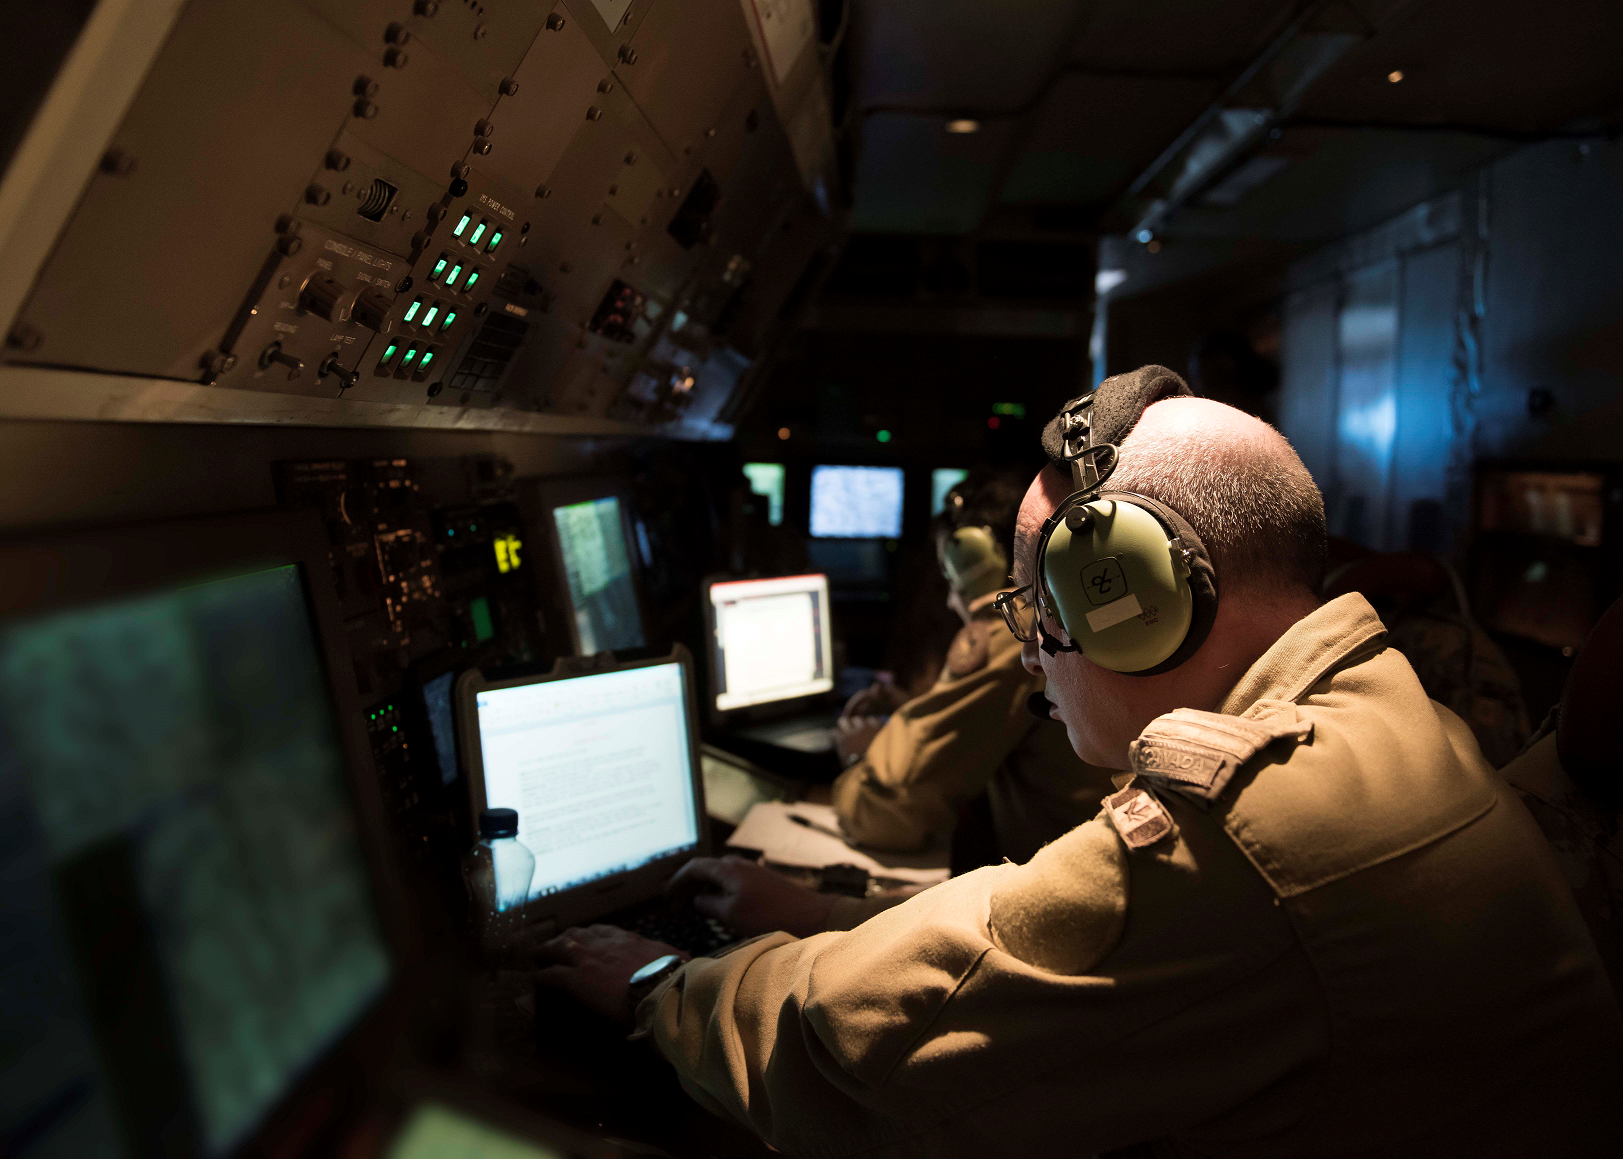 Air Combat System Officers onboard a CP-140 Aurora patrol aircraft log in their observations during a reconnaissance mission as part of Operation IMPACT on January 1, 2017. (Photo: Op Impact, DND)